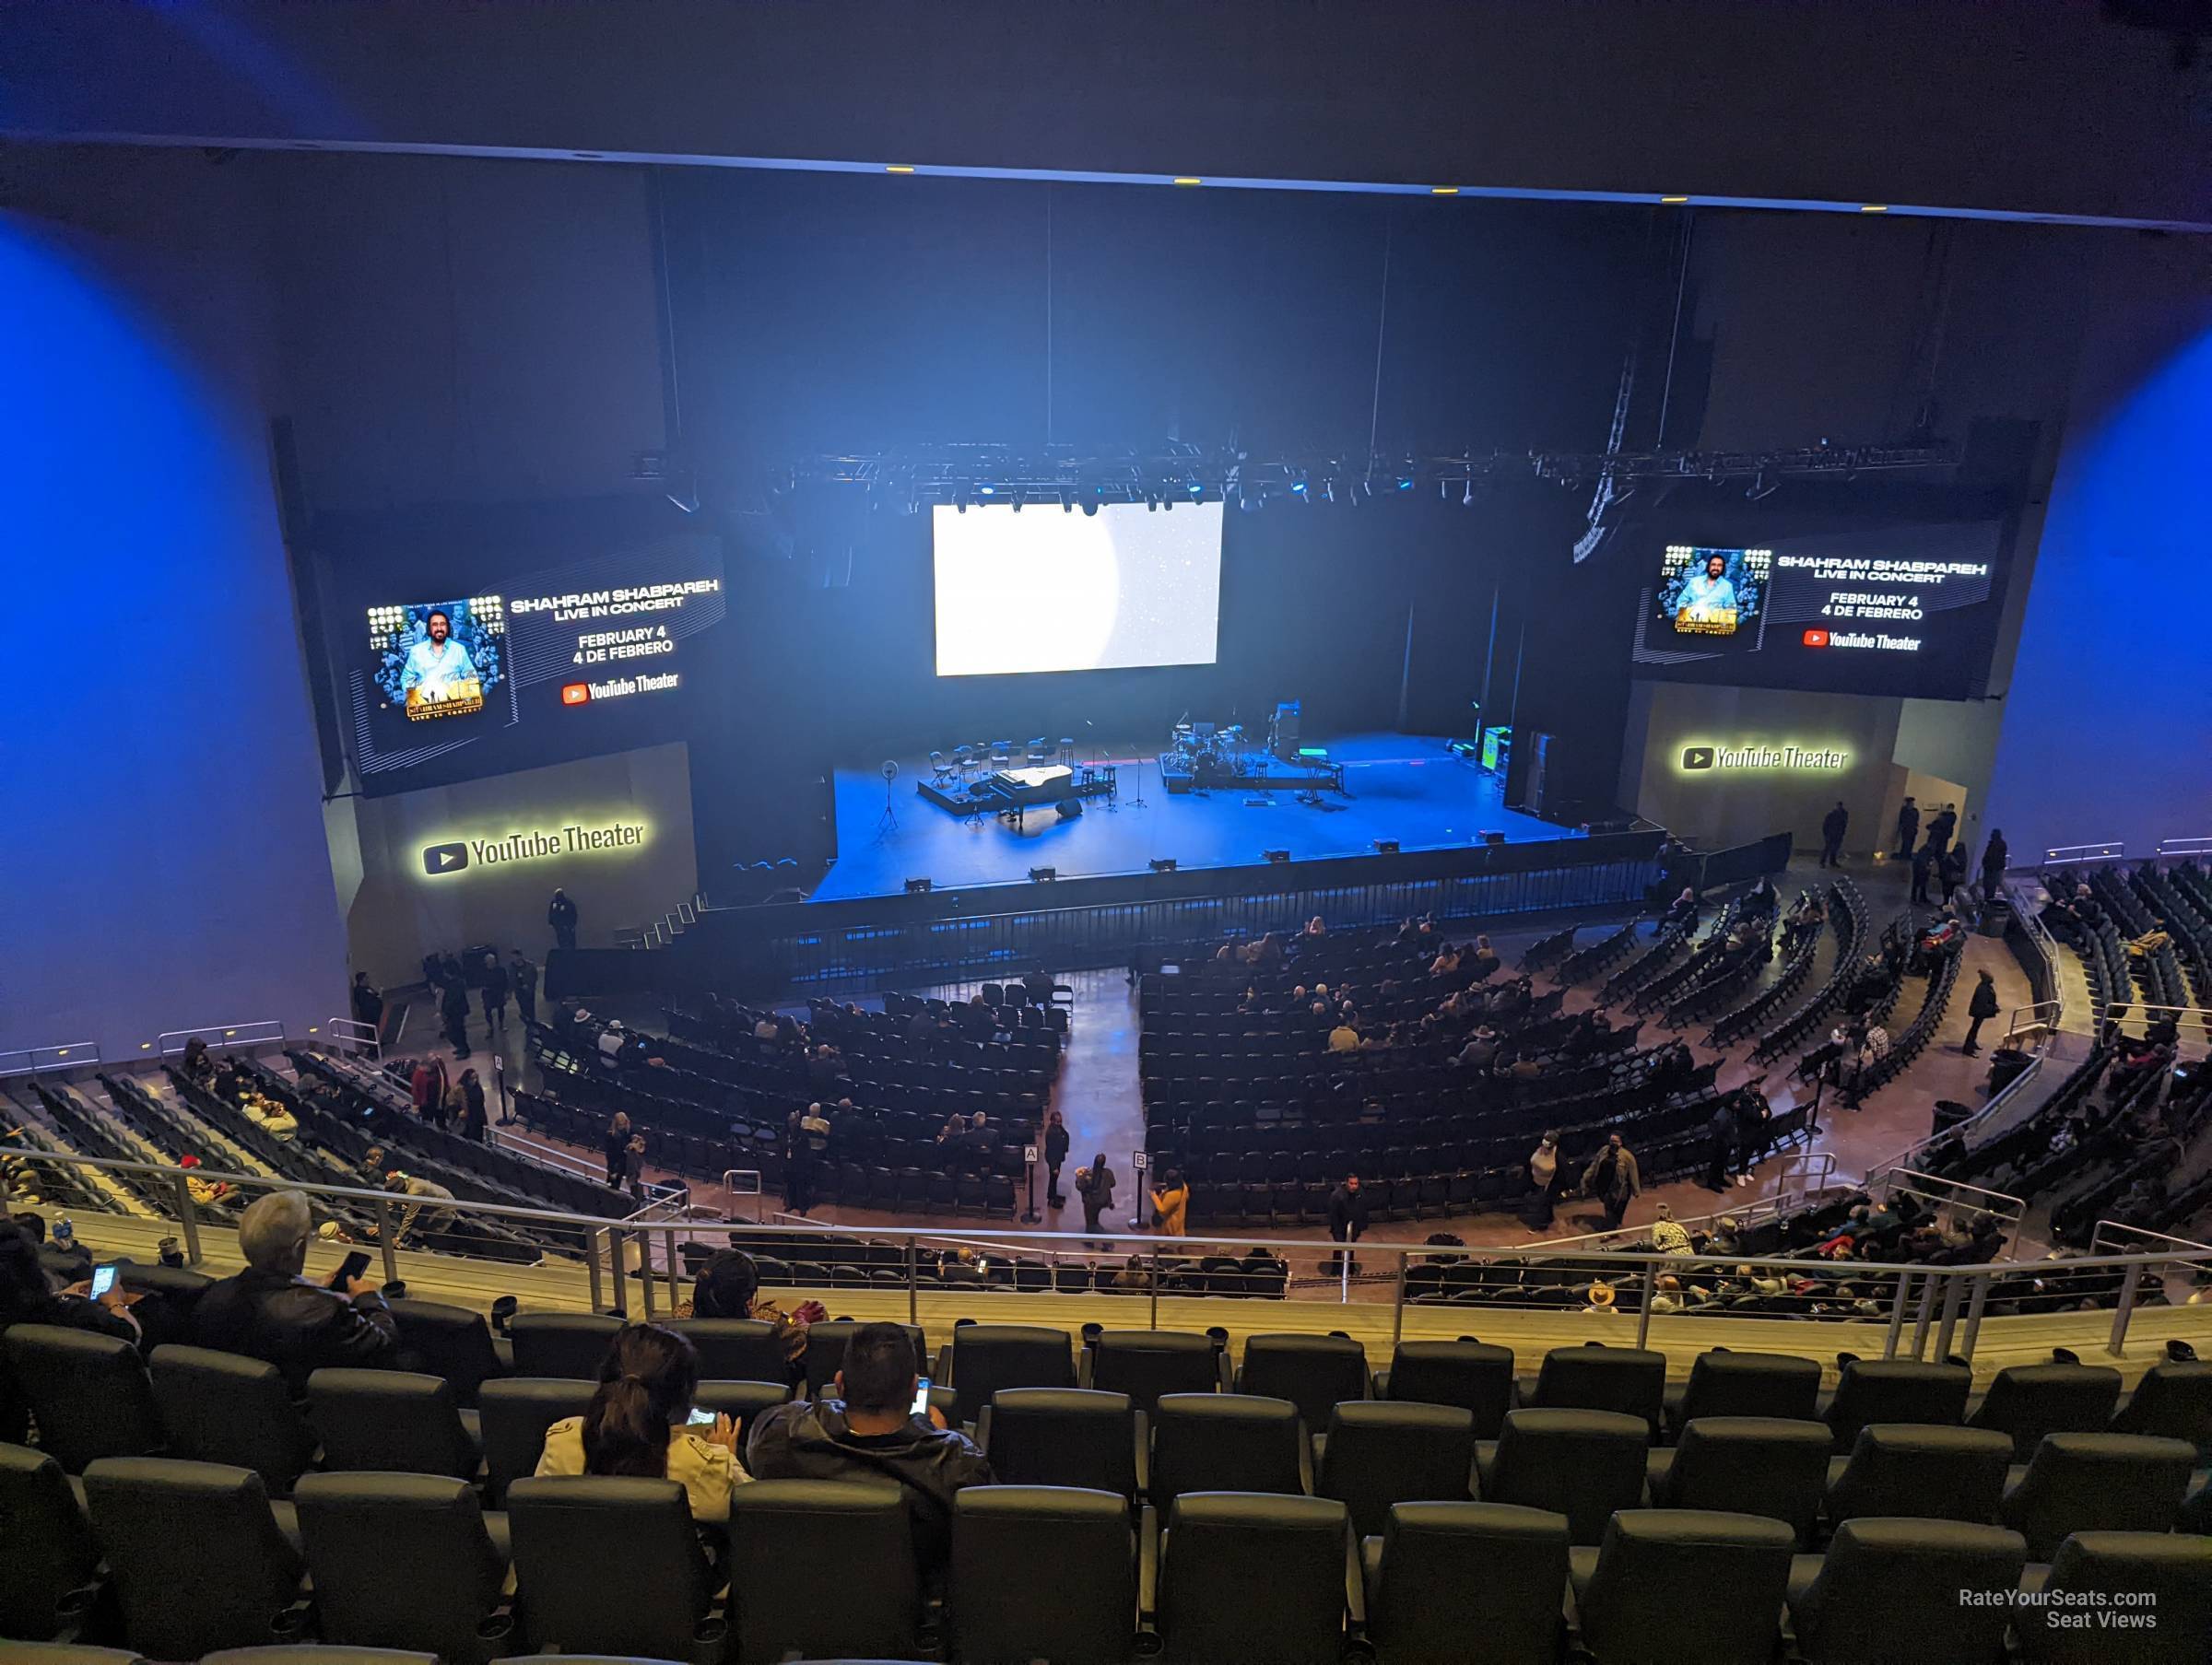 section 203, row h seat view  - youtube theater